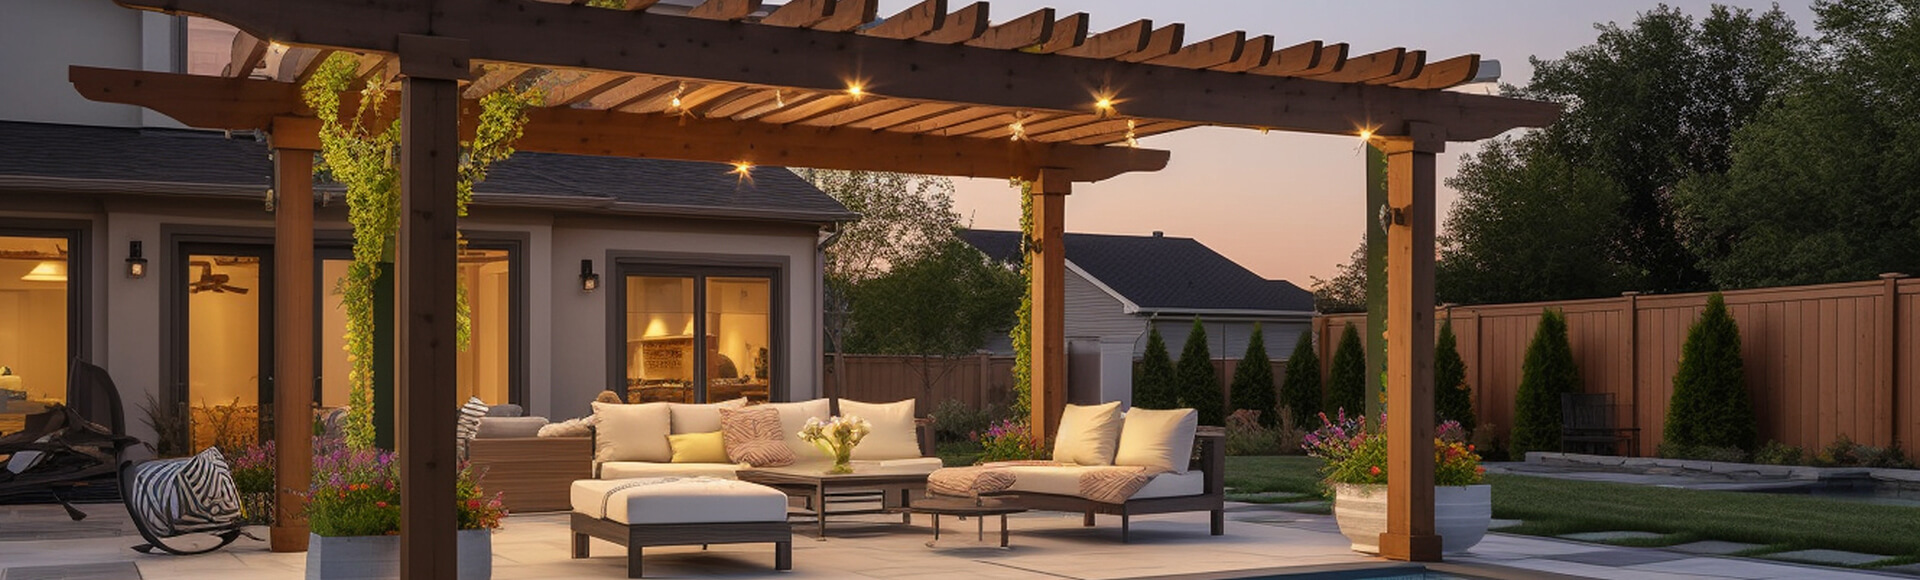 Patio with pergola by pool with outdoor lighting at dusk. 